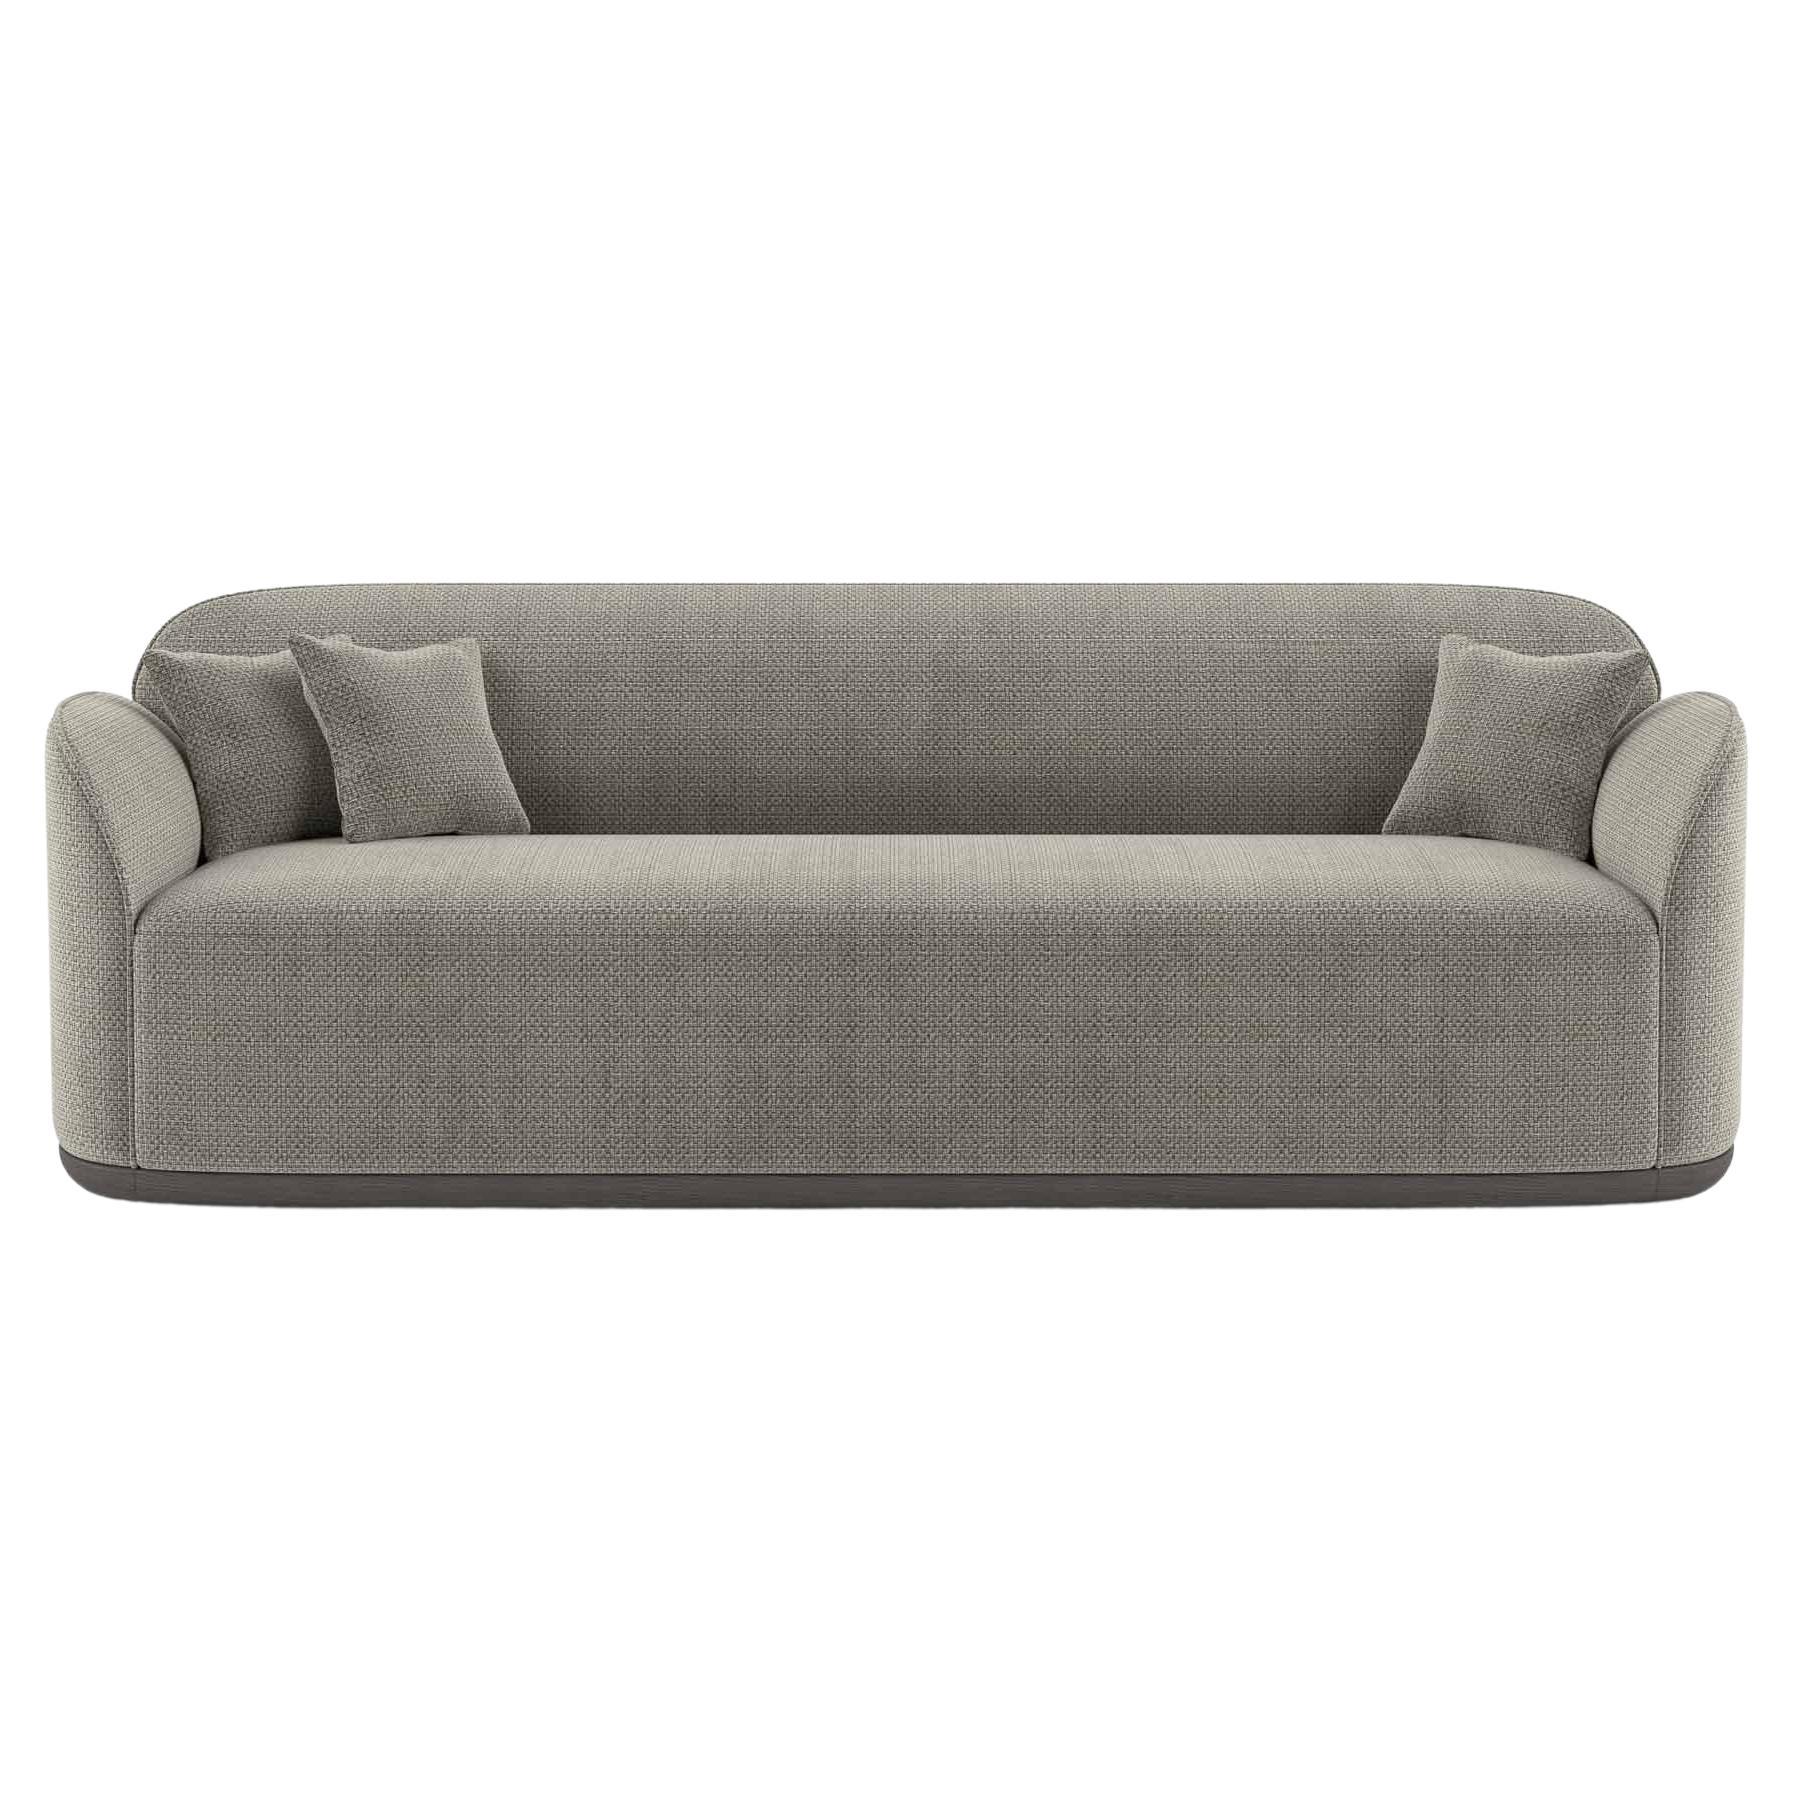 Unio Sofa Upholstered with Pierre Frey Hanoi Fabric by Poiat For Sale